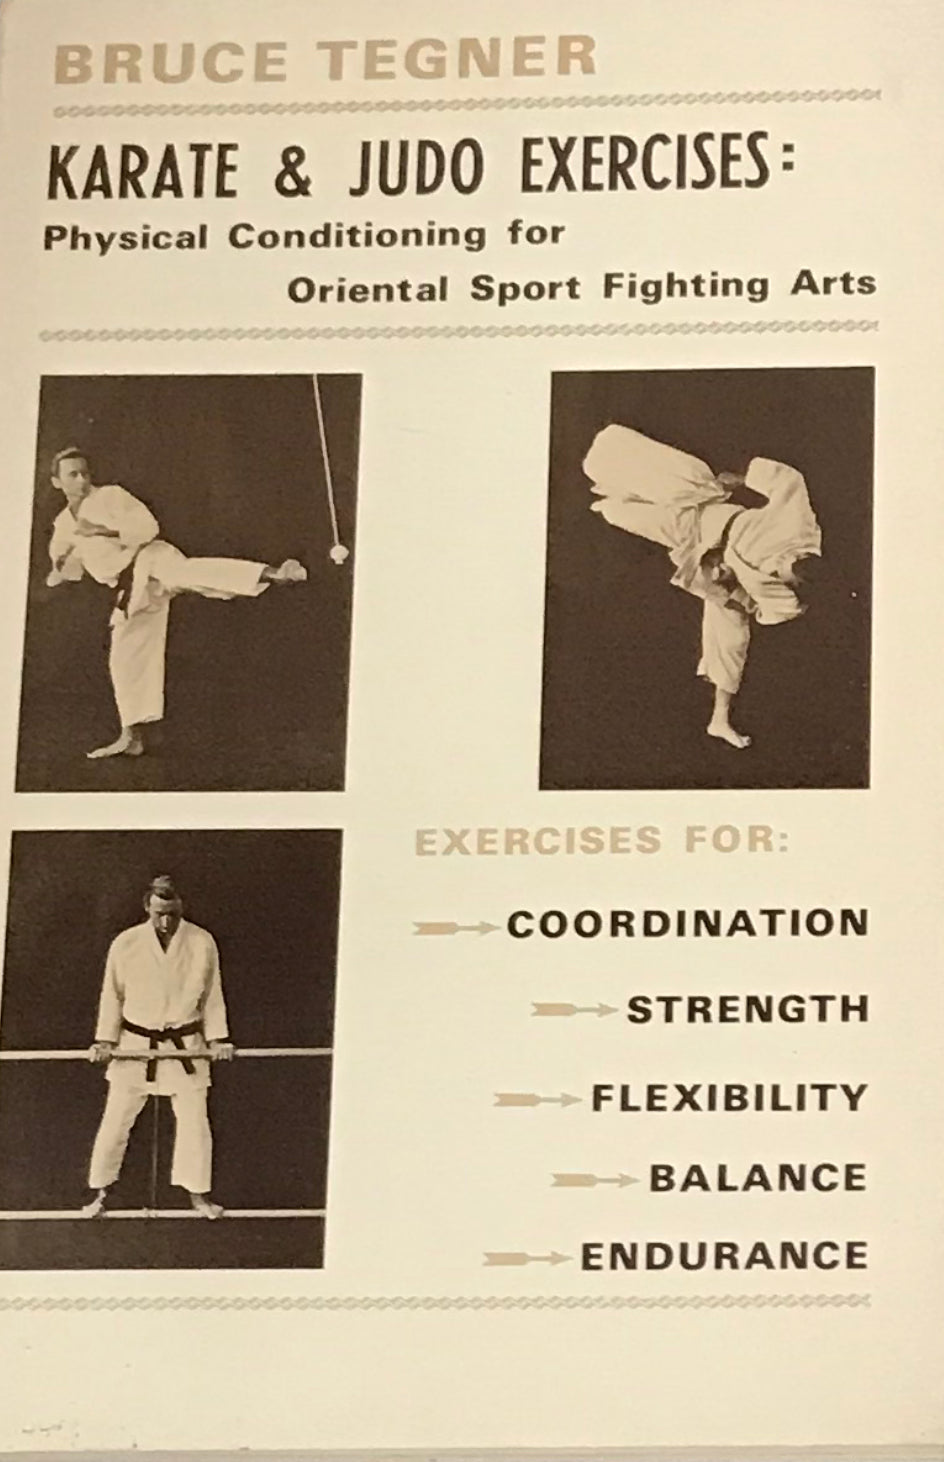 Karate & judo exercises: physical conditioning for Oriental sport fighting arts Book by Bruce Tegner (Preowned) - Budovideos Inc